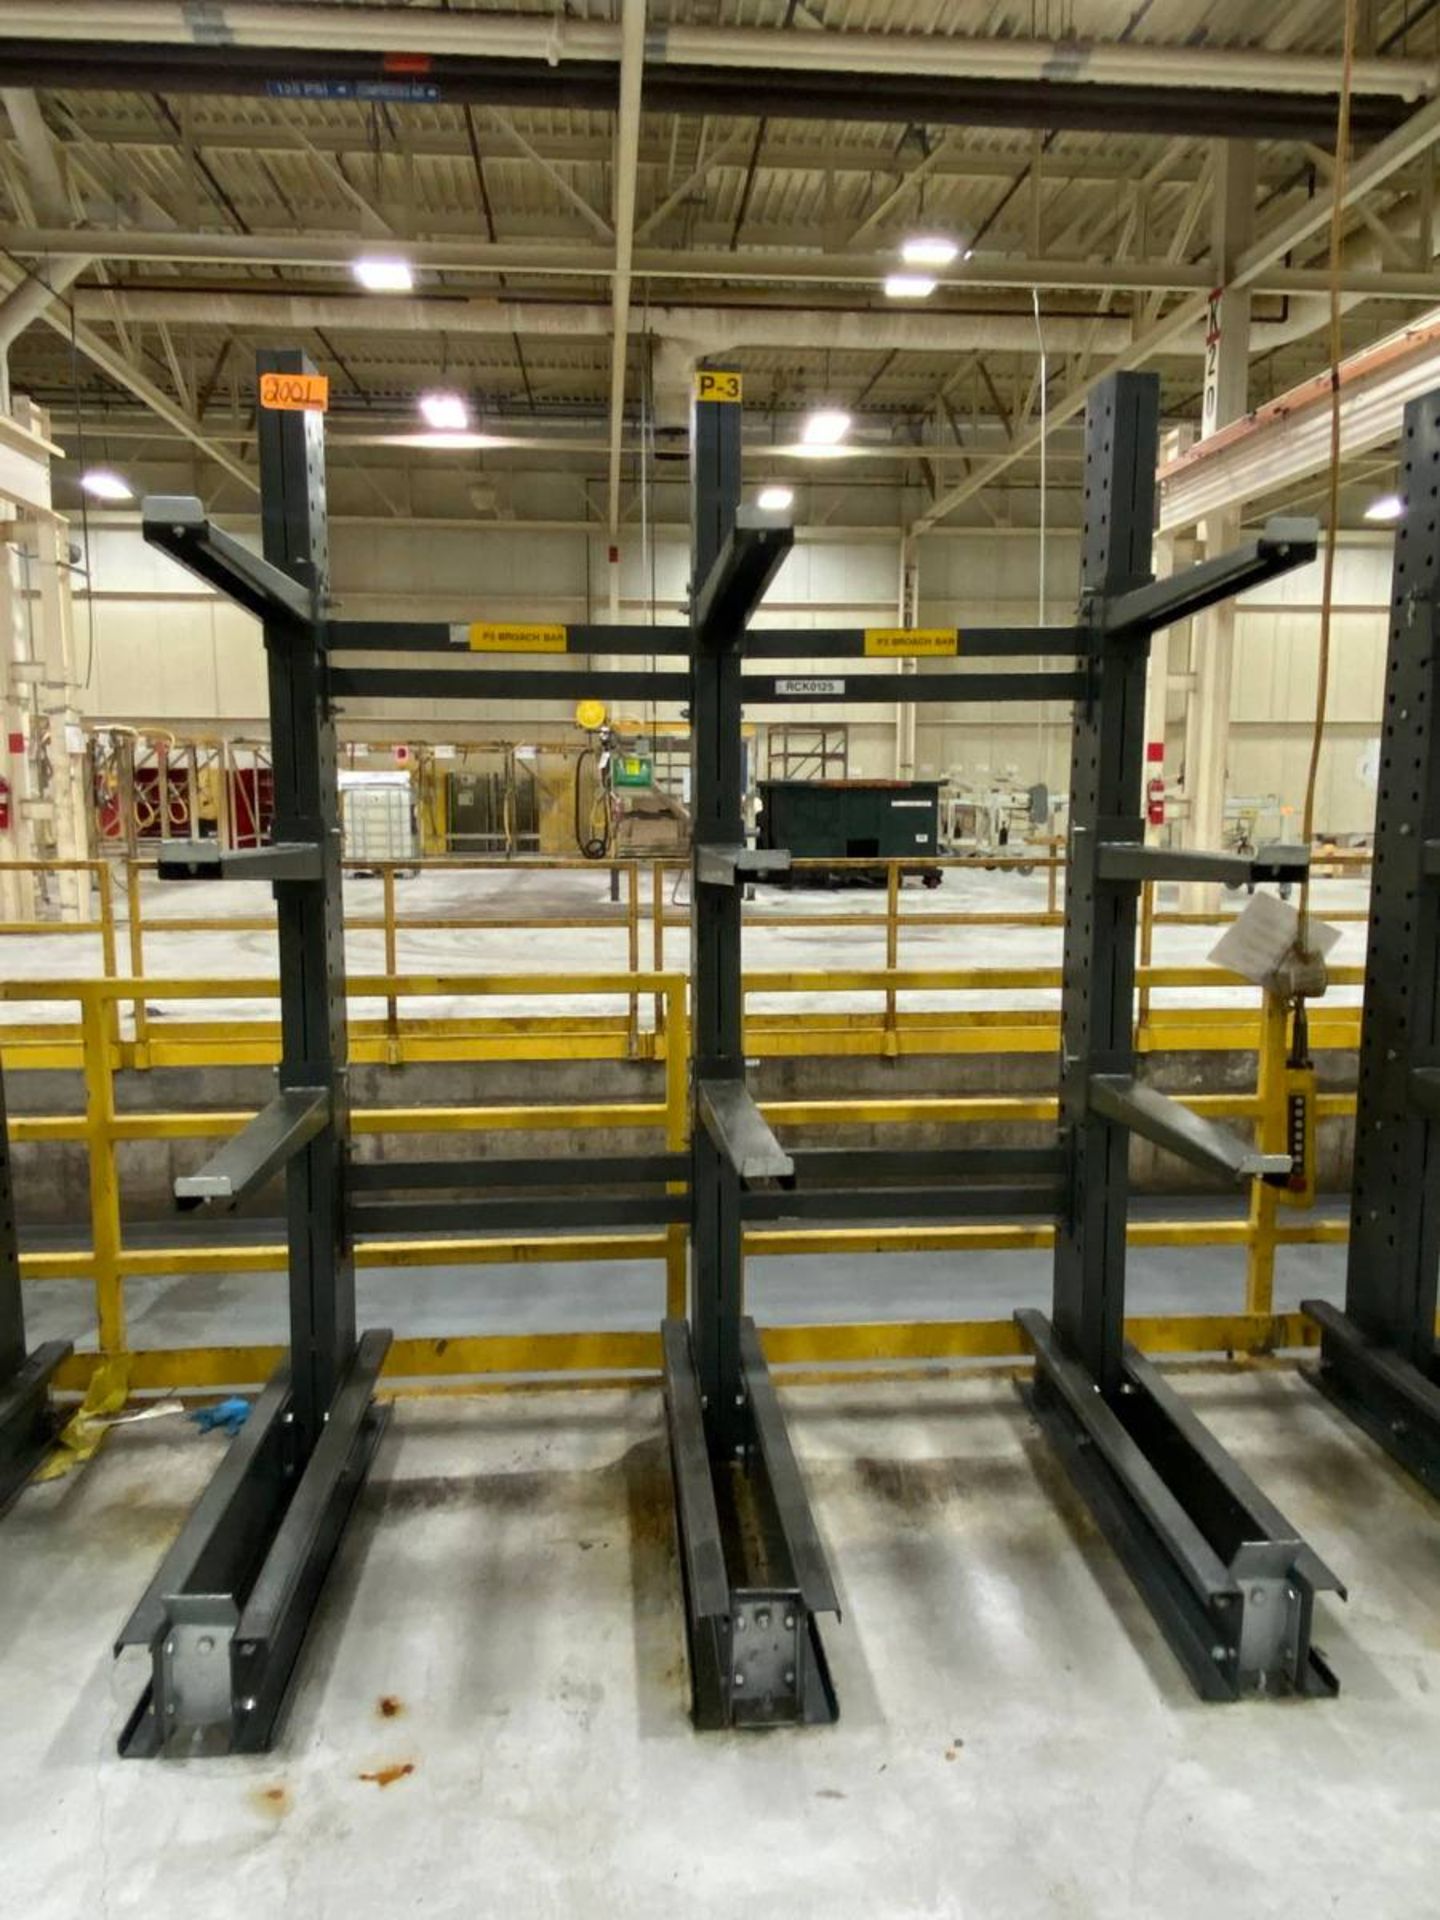 Steel tree Series 25 8' H x 76'' W Cantilever Racking - Image 2 of 4